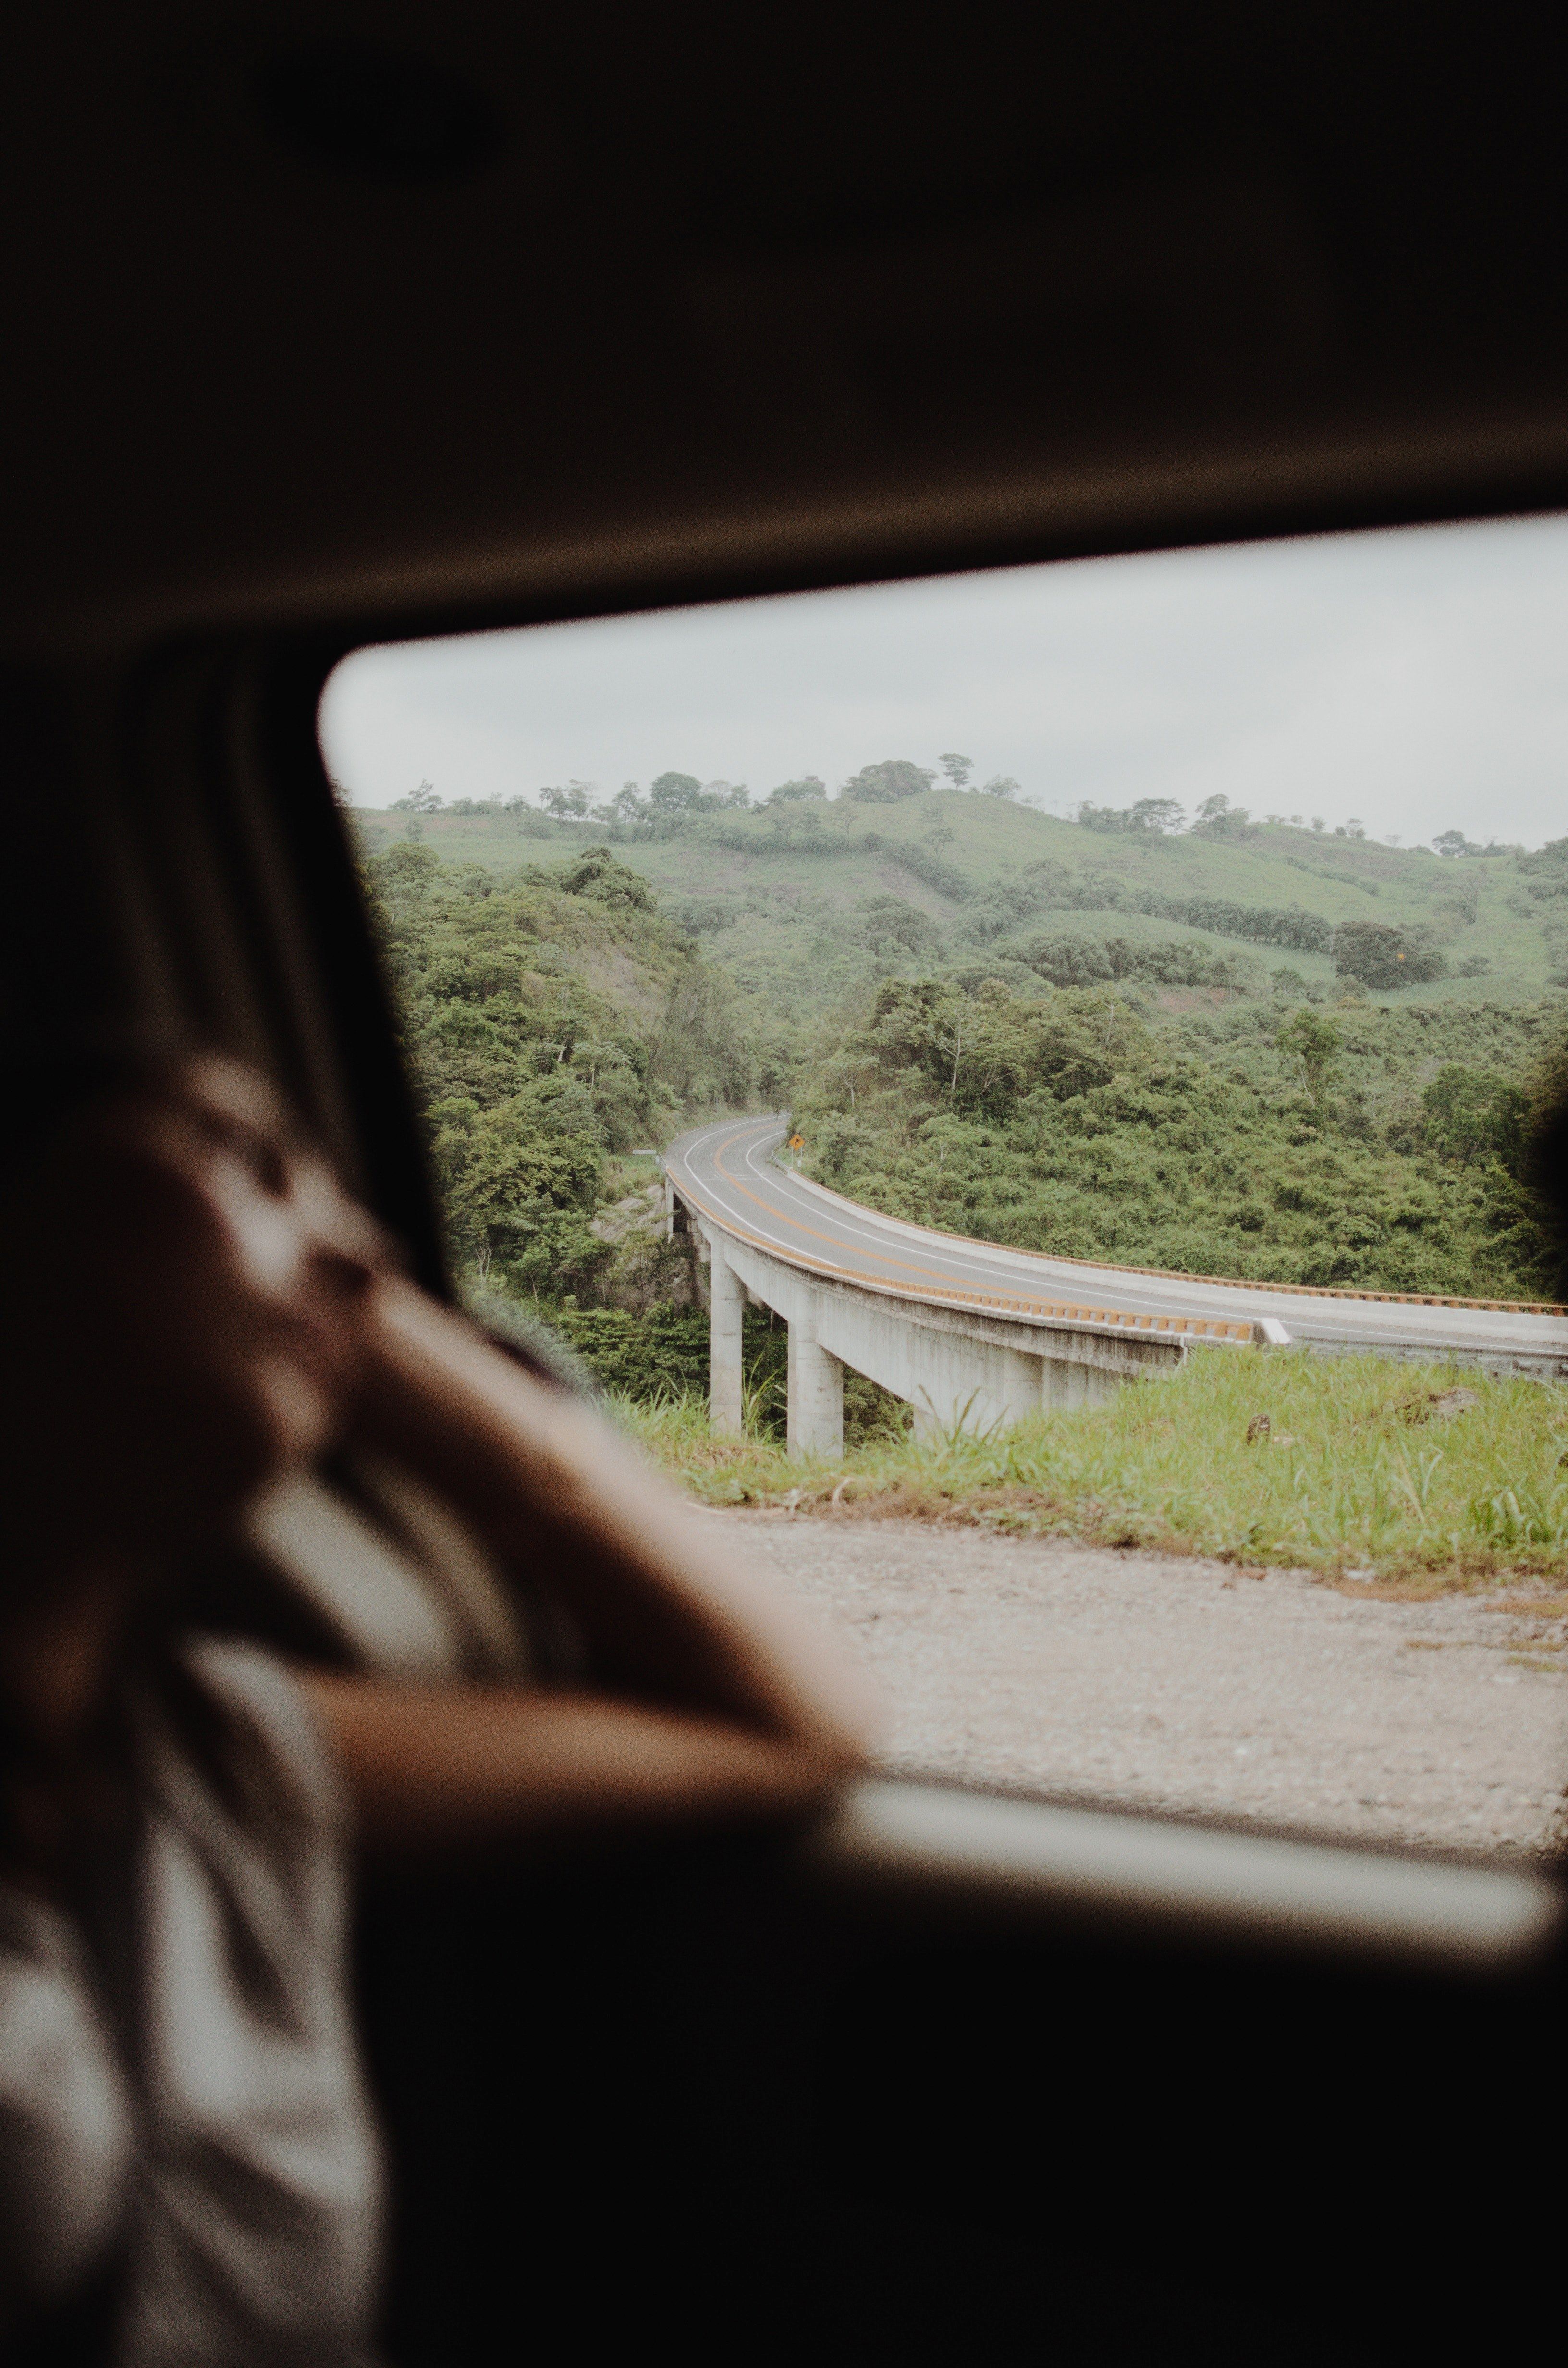 A woman looking out the window of a car at a winding road - Blurry